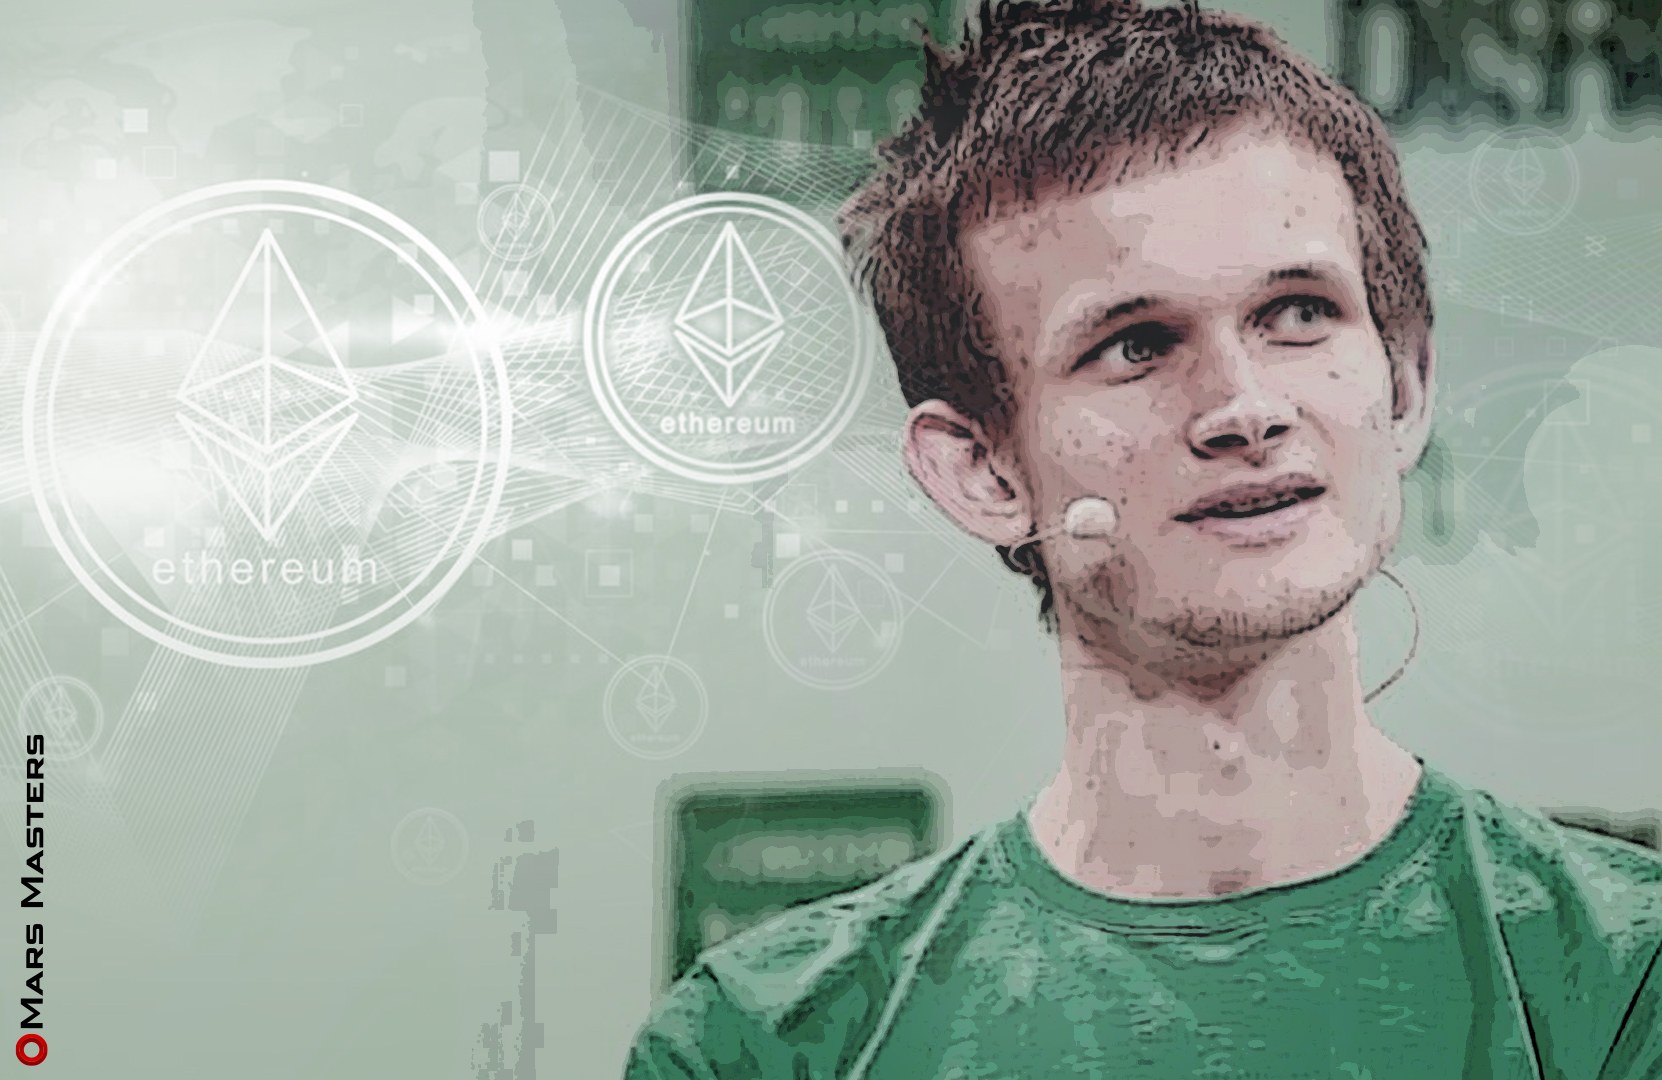 The next steps for Ethereum after Beacon Chain launch are outlined by Vitalik Buterin